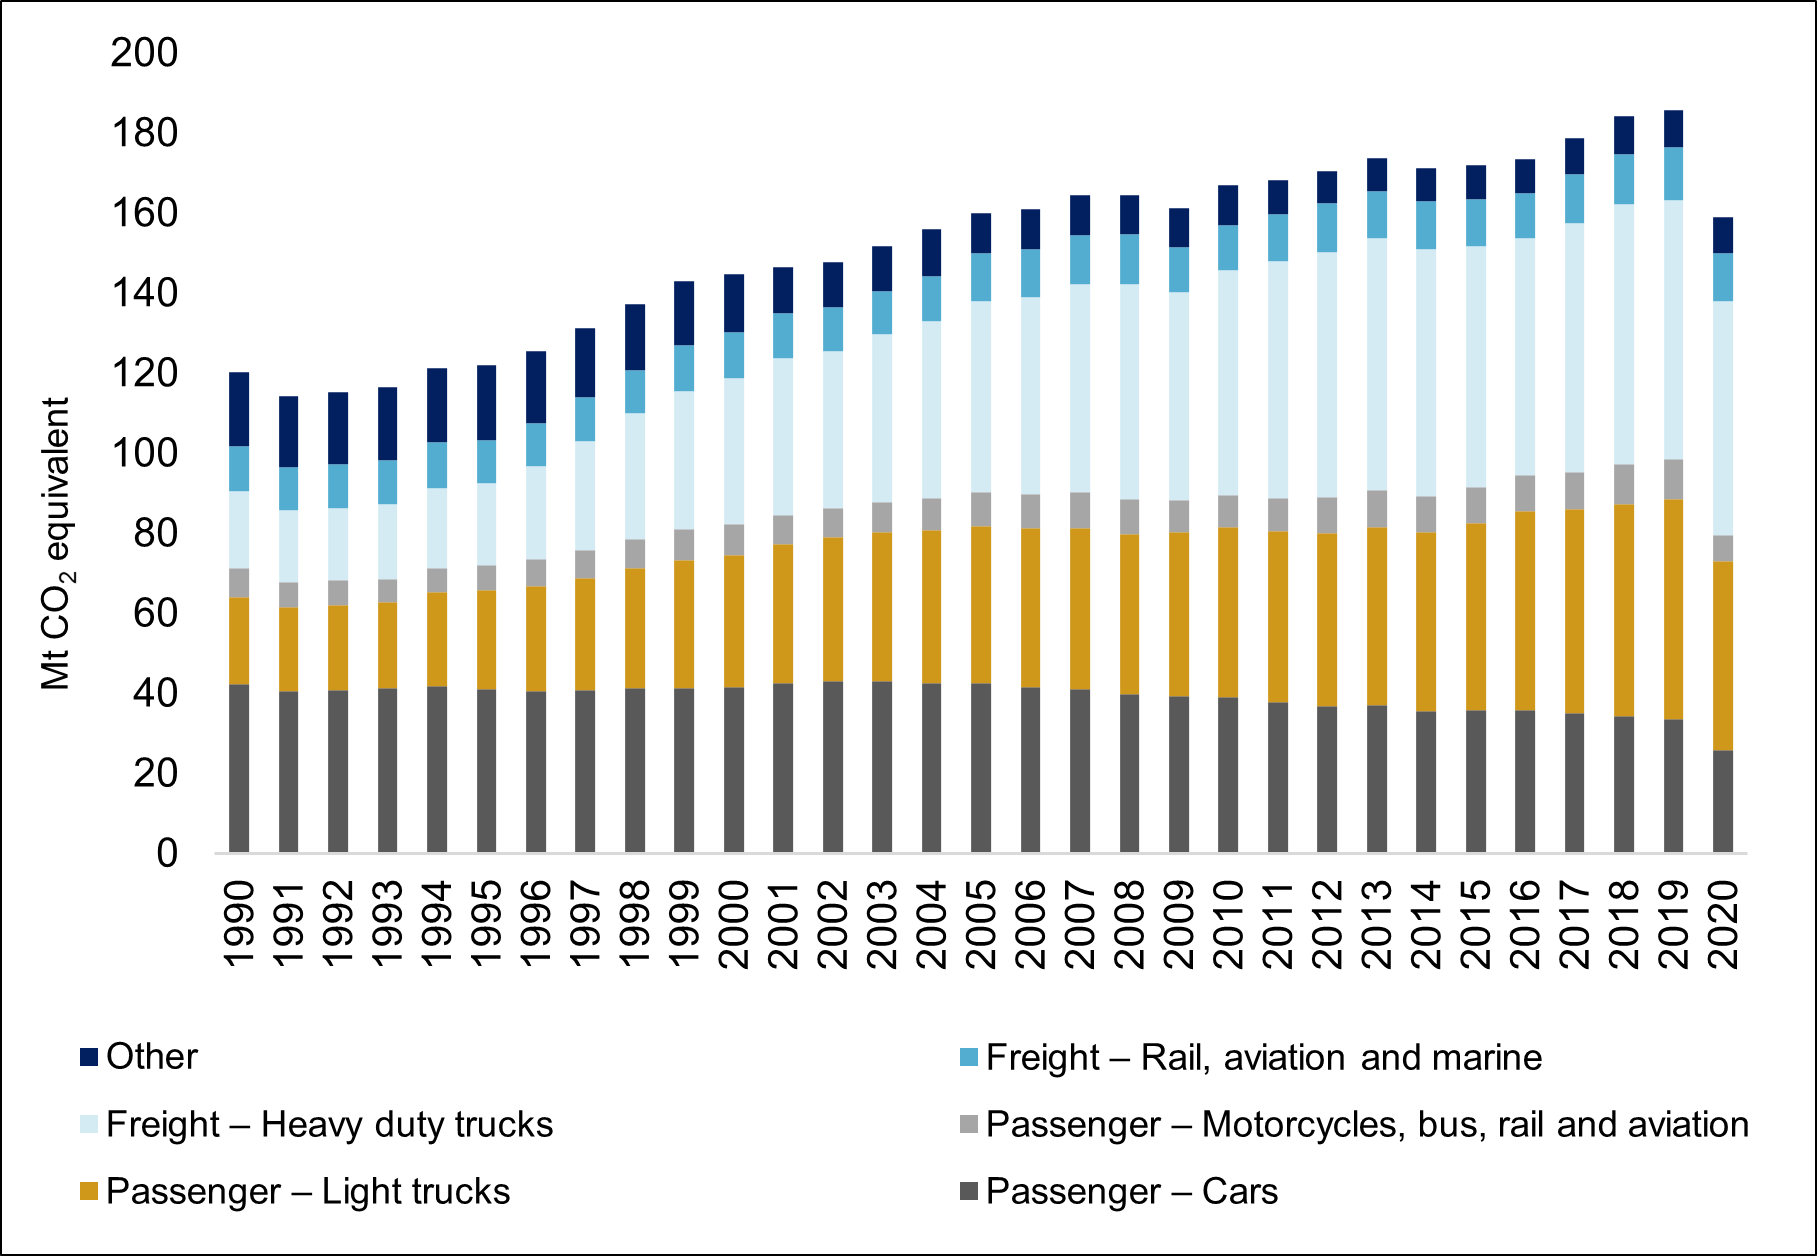 Figure 7 illustrates the greenhouse gas emissions produced by Canada's transportation sector from 1990 to 2020. The chart shows a gradual increase – with minor fluctuations – in total greenhouse gas emissions produced by the transportation sector from 1990 to 2020. In 2020, total greenhouse gas emissions produced by the sector declined significantly. However, we note that emissions from heavy freight trucks more than tripled during the study period, rising from 19.4 megatons of carbon dioxide equivalent in 1990 to 58.5 megatons of carbon dioxide equivalent in 2020.